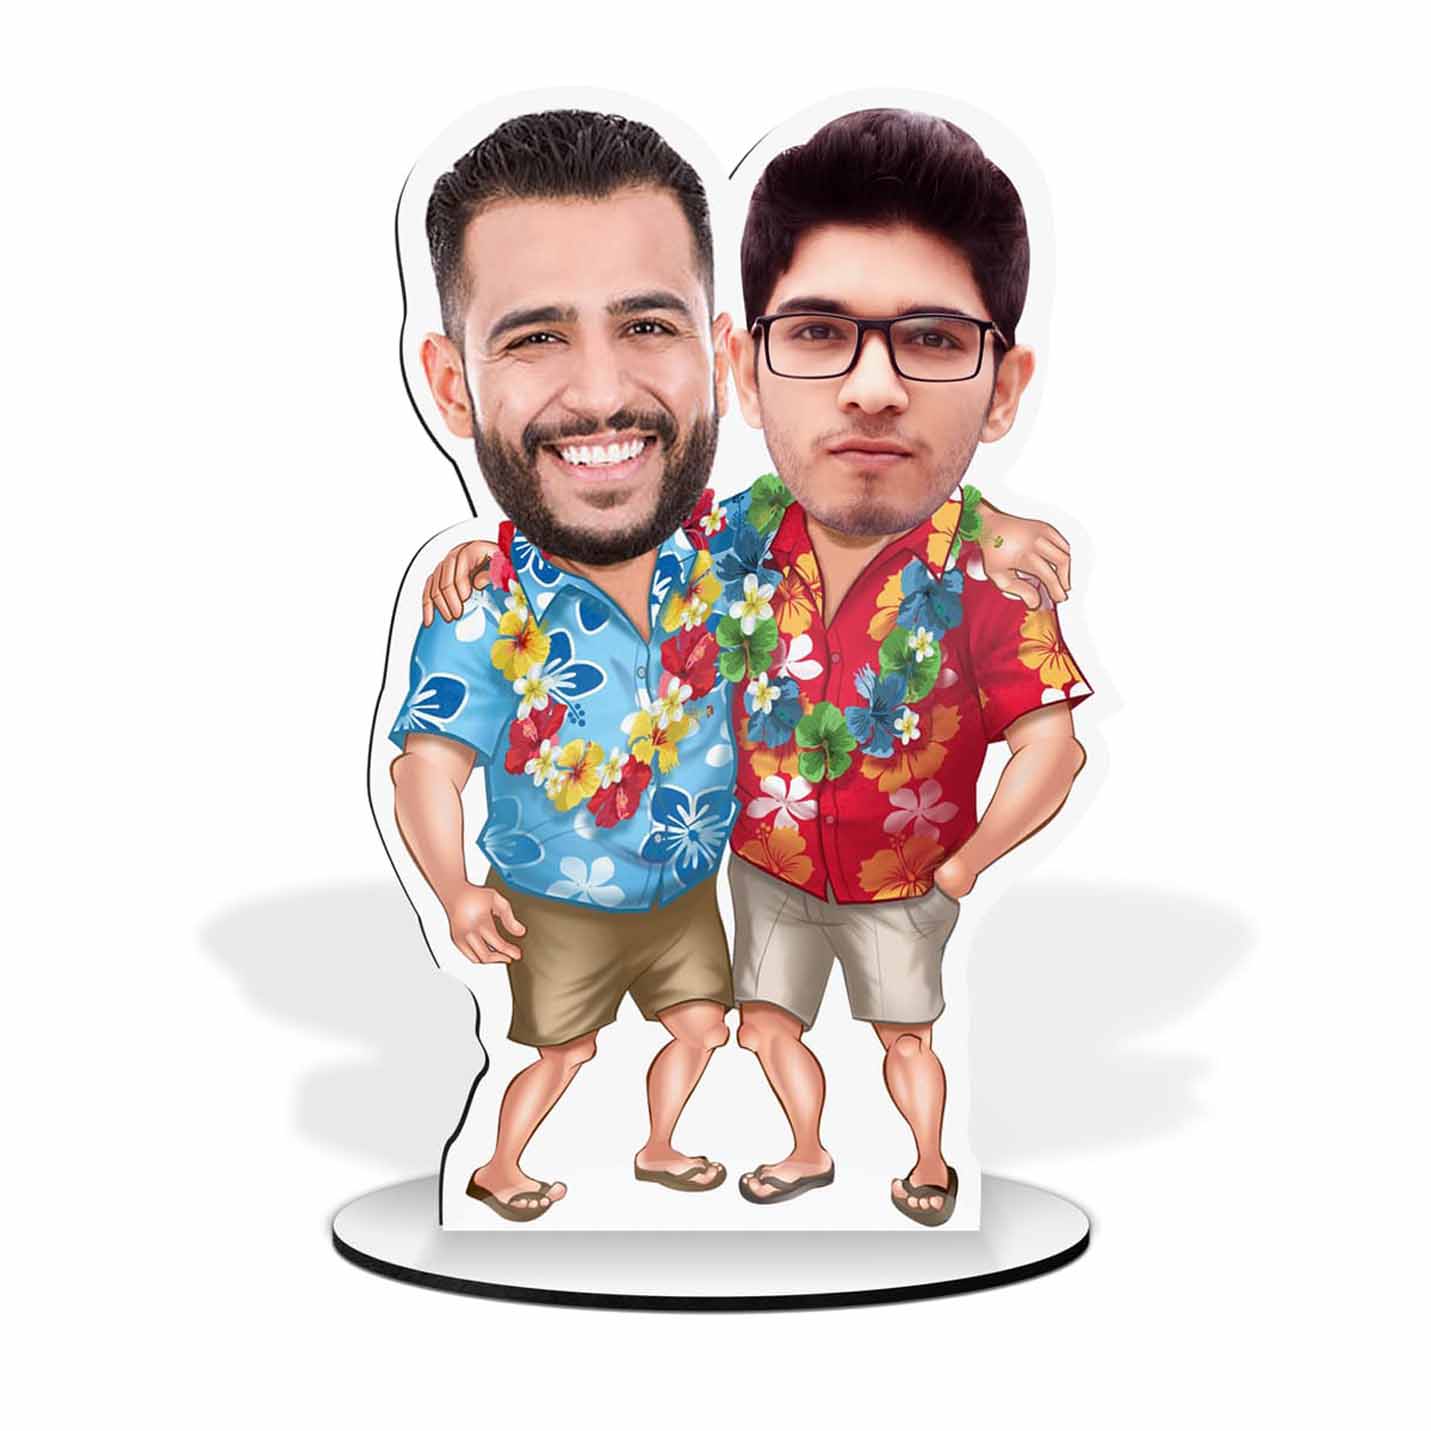 Brothers-day-caricature.jpg